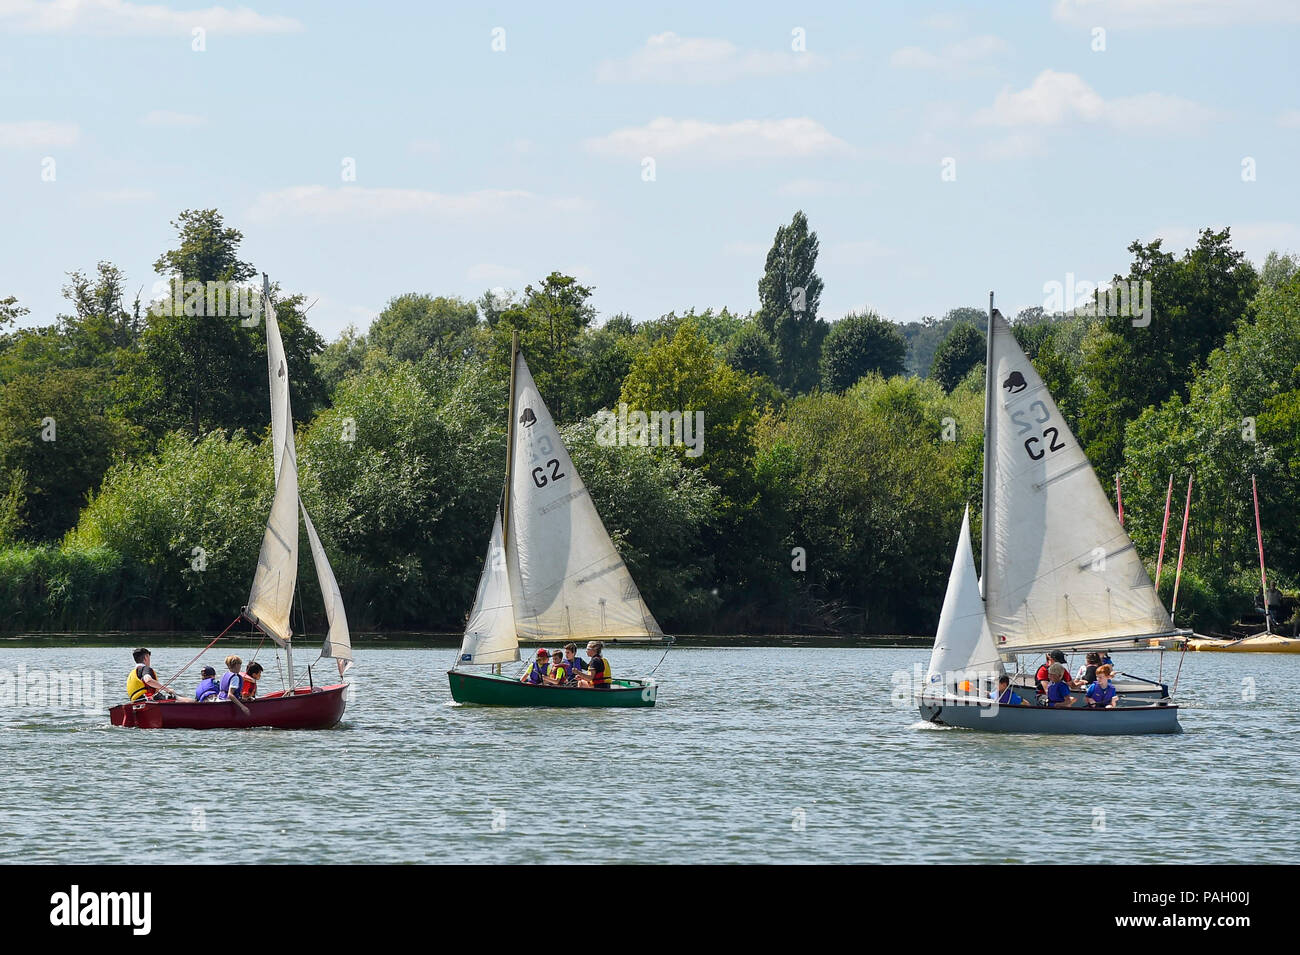 London, UK.  23 June 2018. School children receive sailing lessons during hot weather at Rickmansworth Aquadrome in north west London, on a day when temperatures reached 30C.  Temperatures up to 35C are forecast for the rest of the week during the current heatwave. Credit: Stephen Chung / Alamy Live News Stock Photo